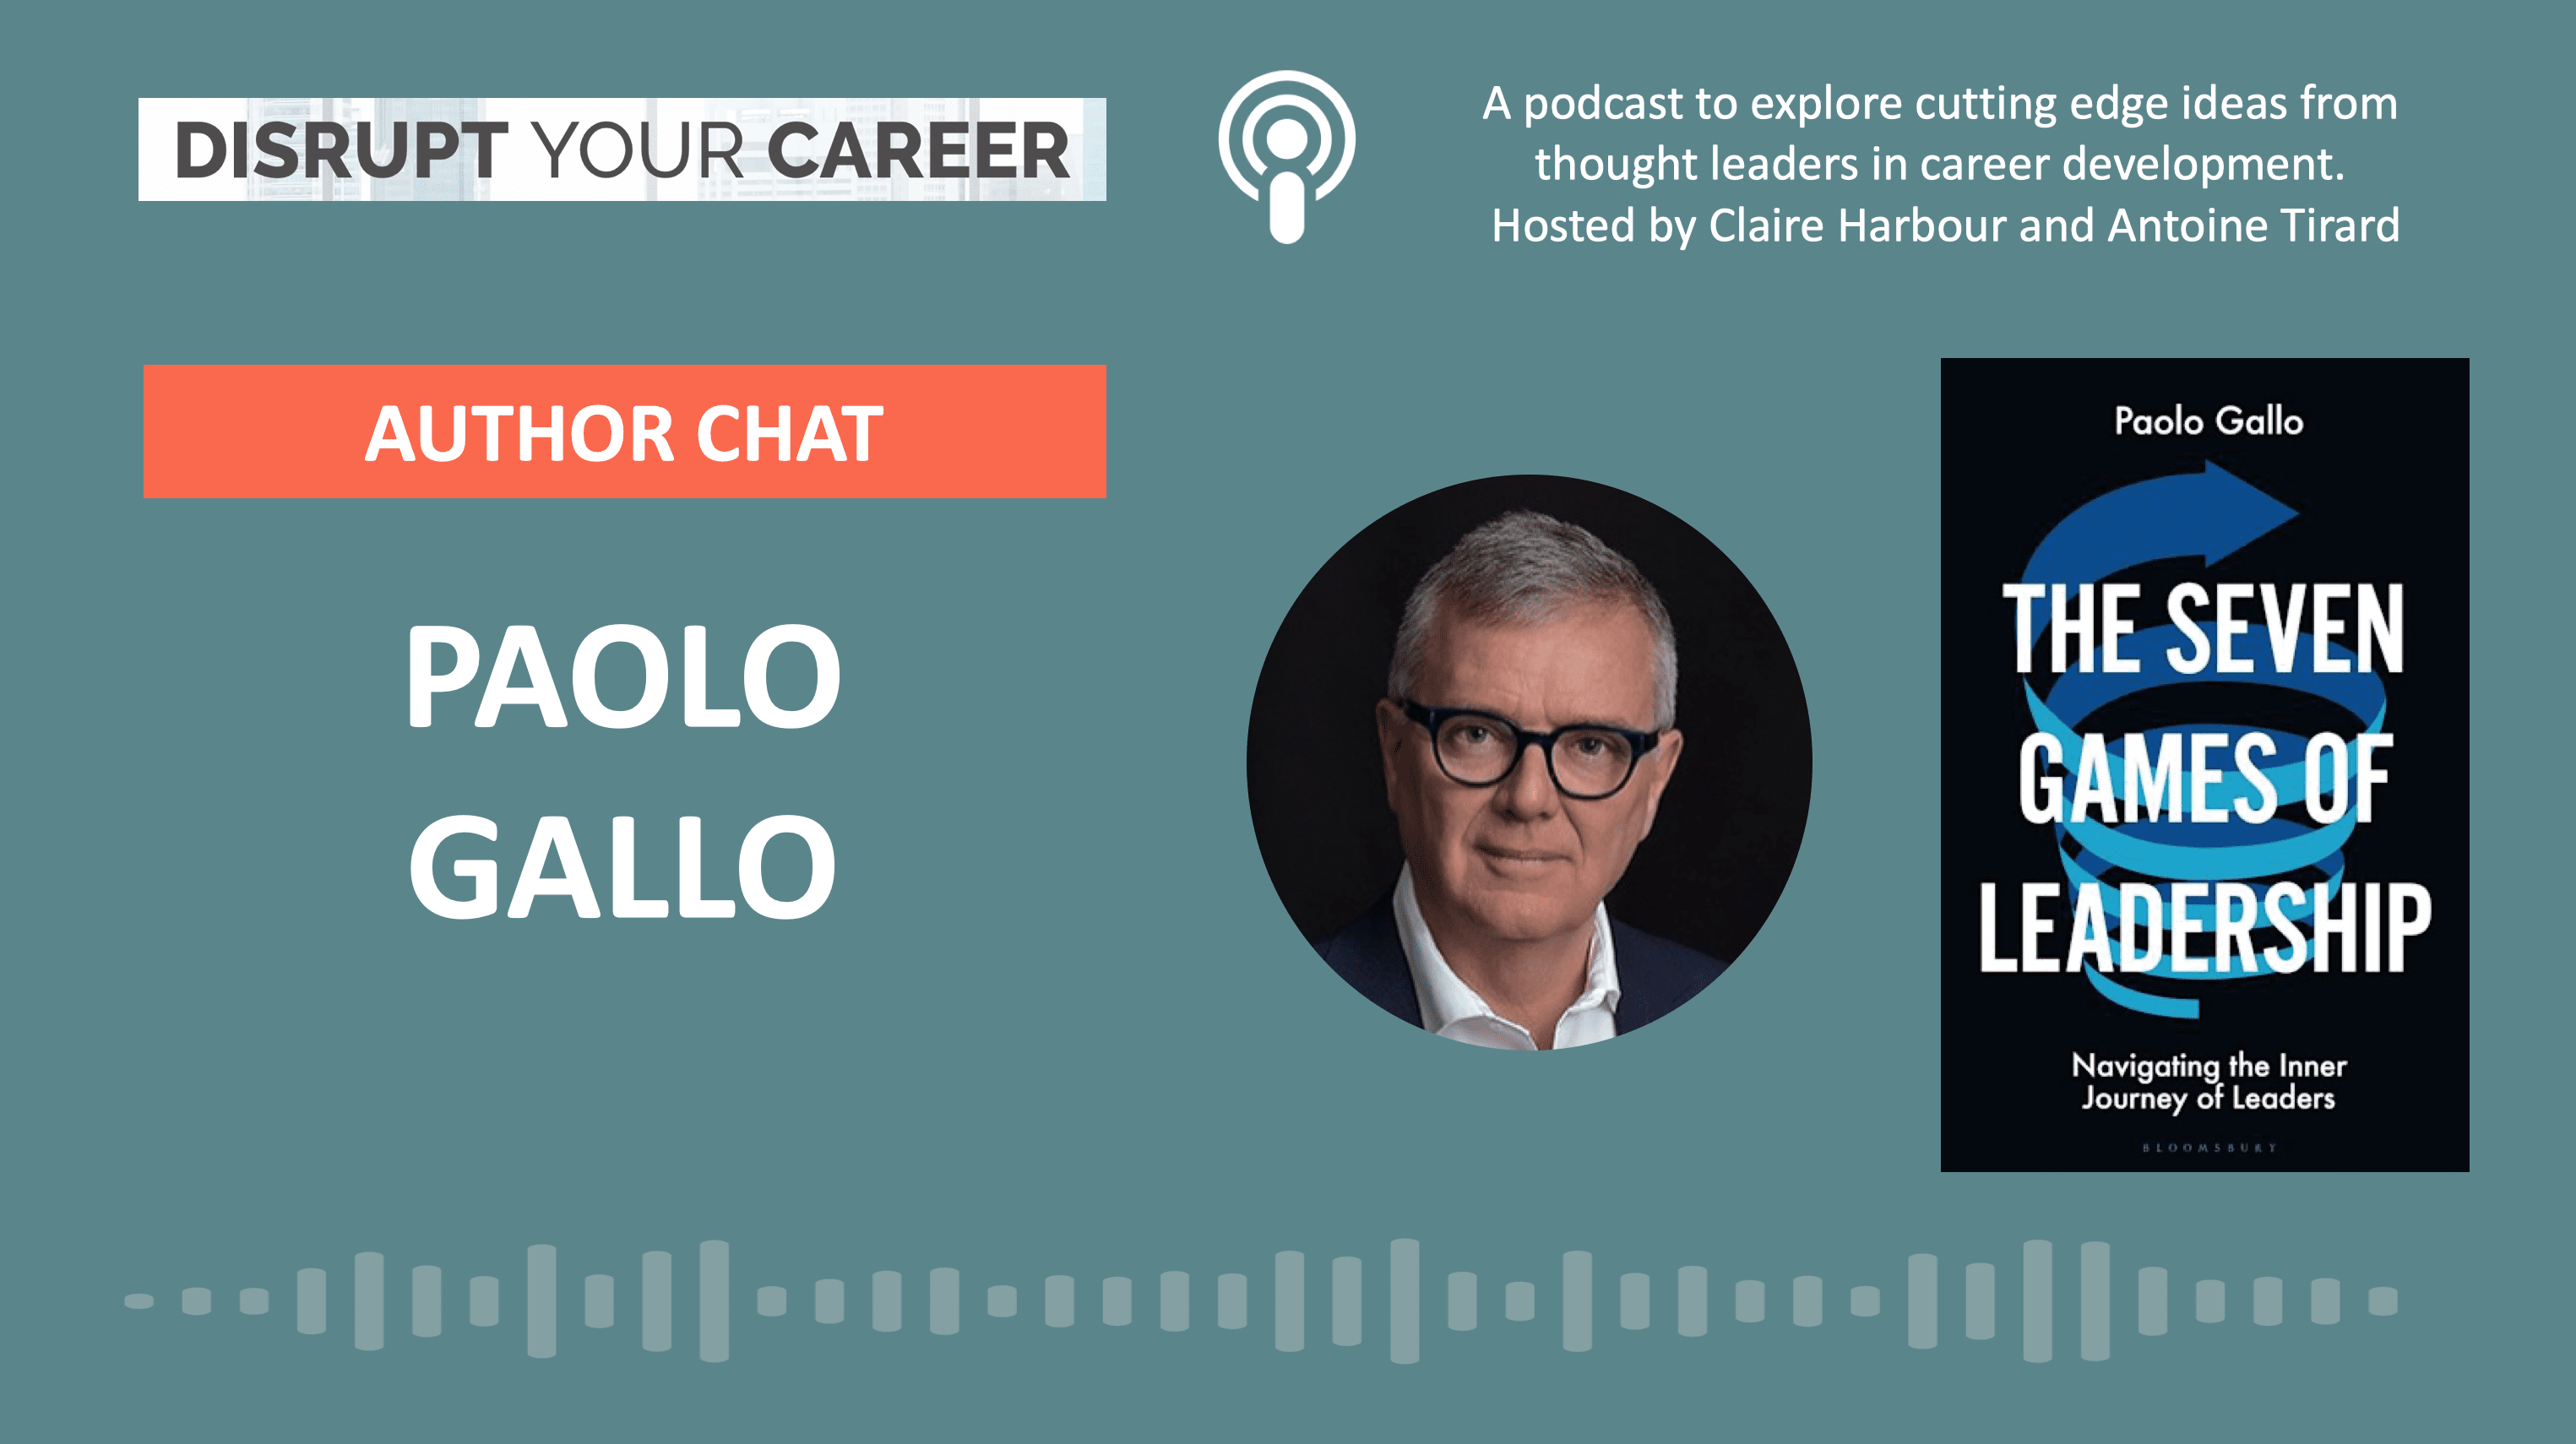 Author Chat: The Seven Games of Leadership by Paolo Gallo